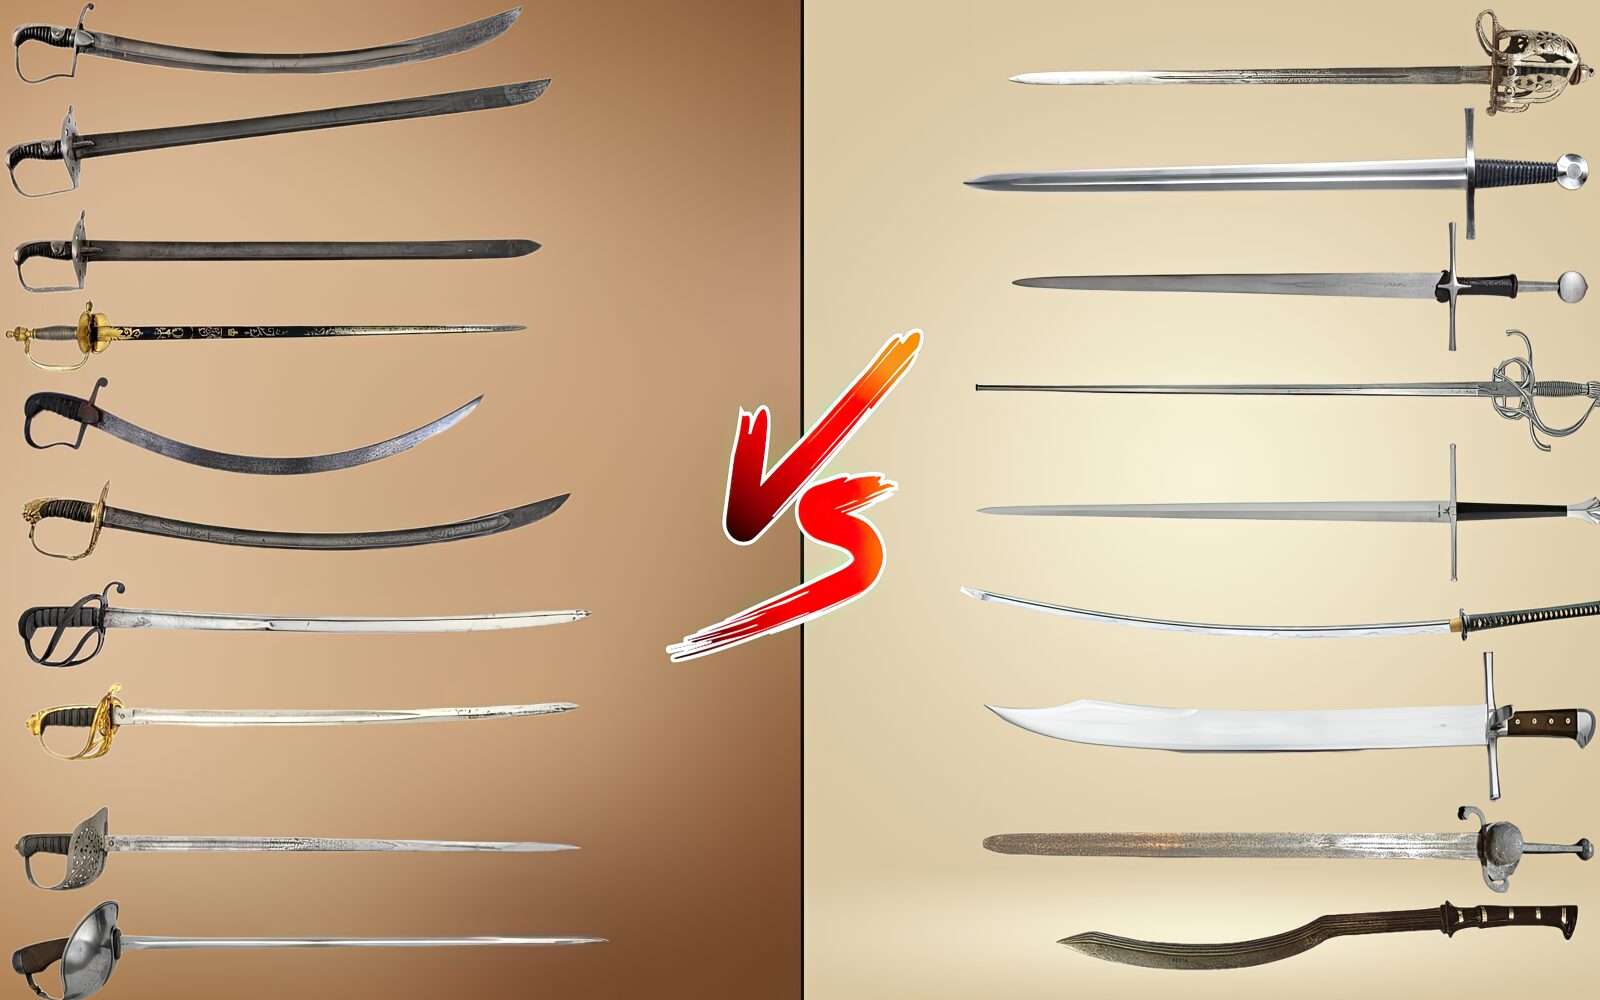 Sword vs Saber: Differences, Types, Design, History and Combat